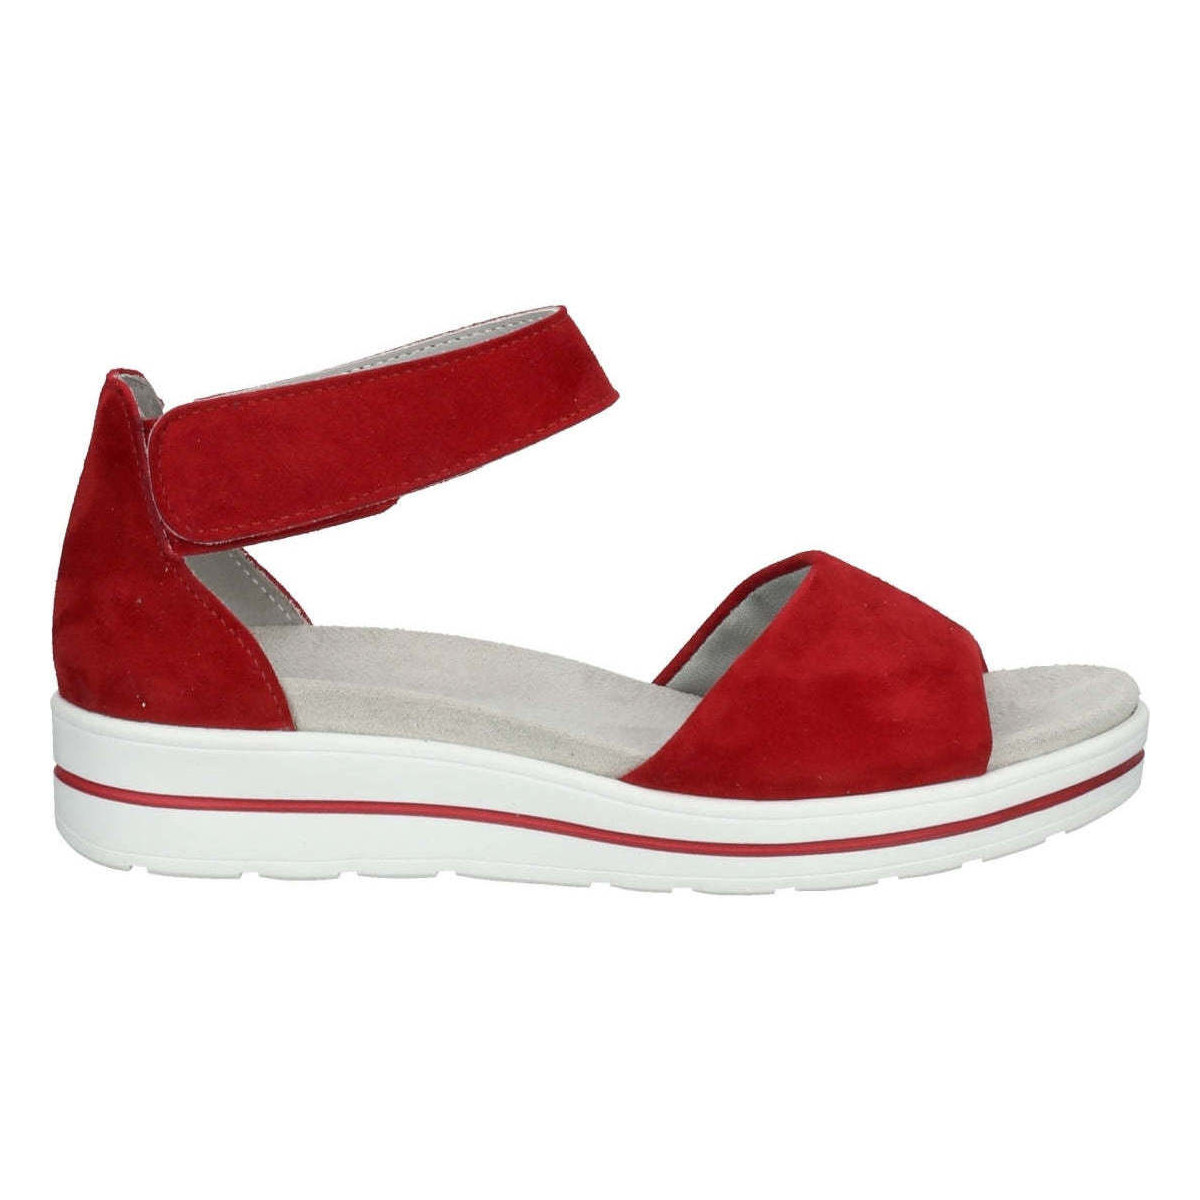 Chaussures Femme Sandales sport Bama rot casual open sandals Rouge